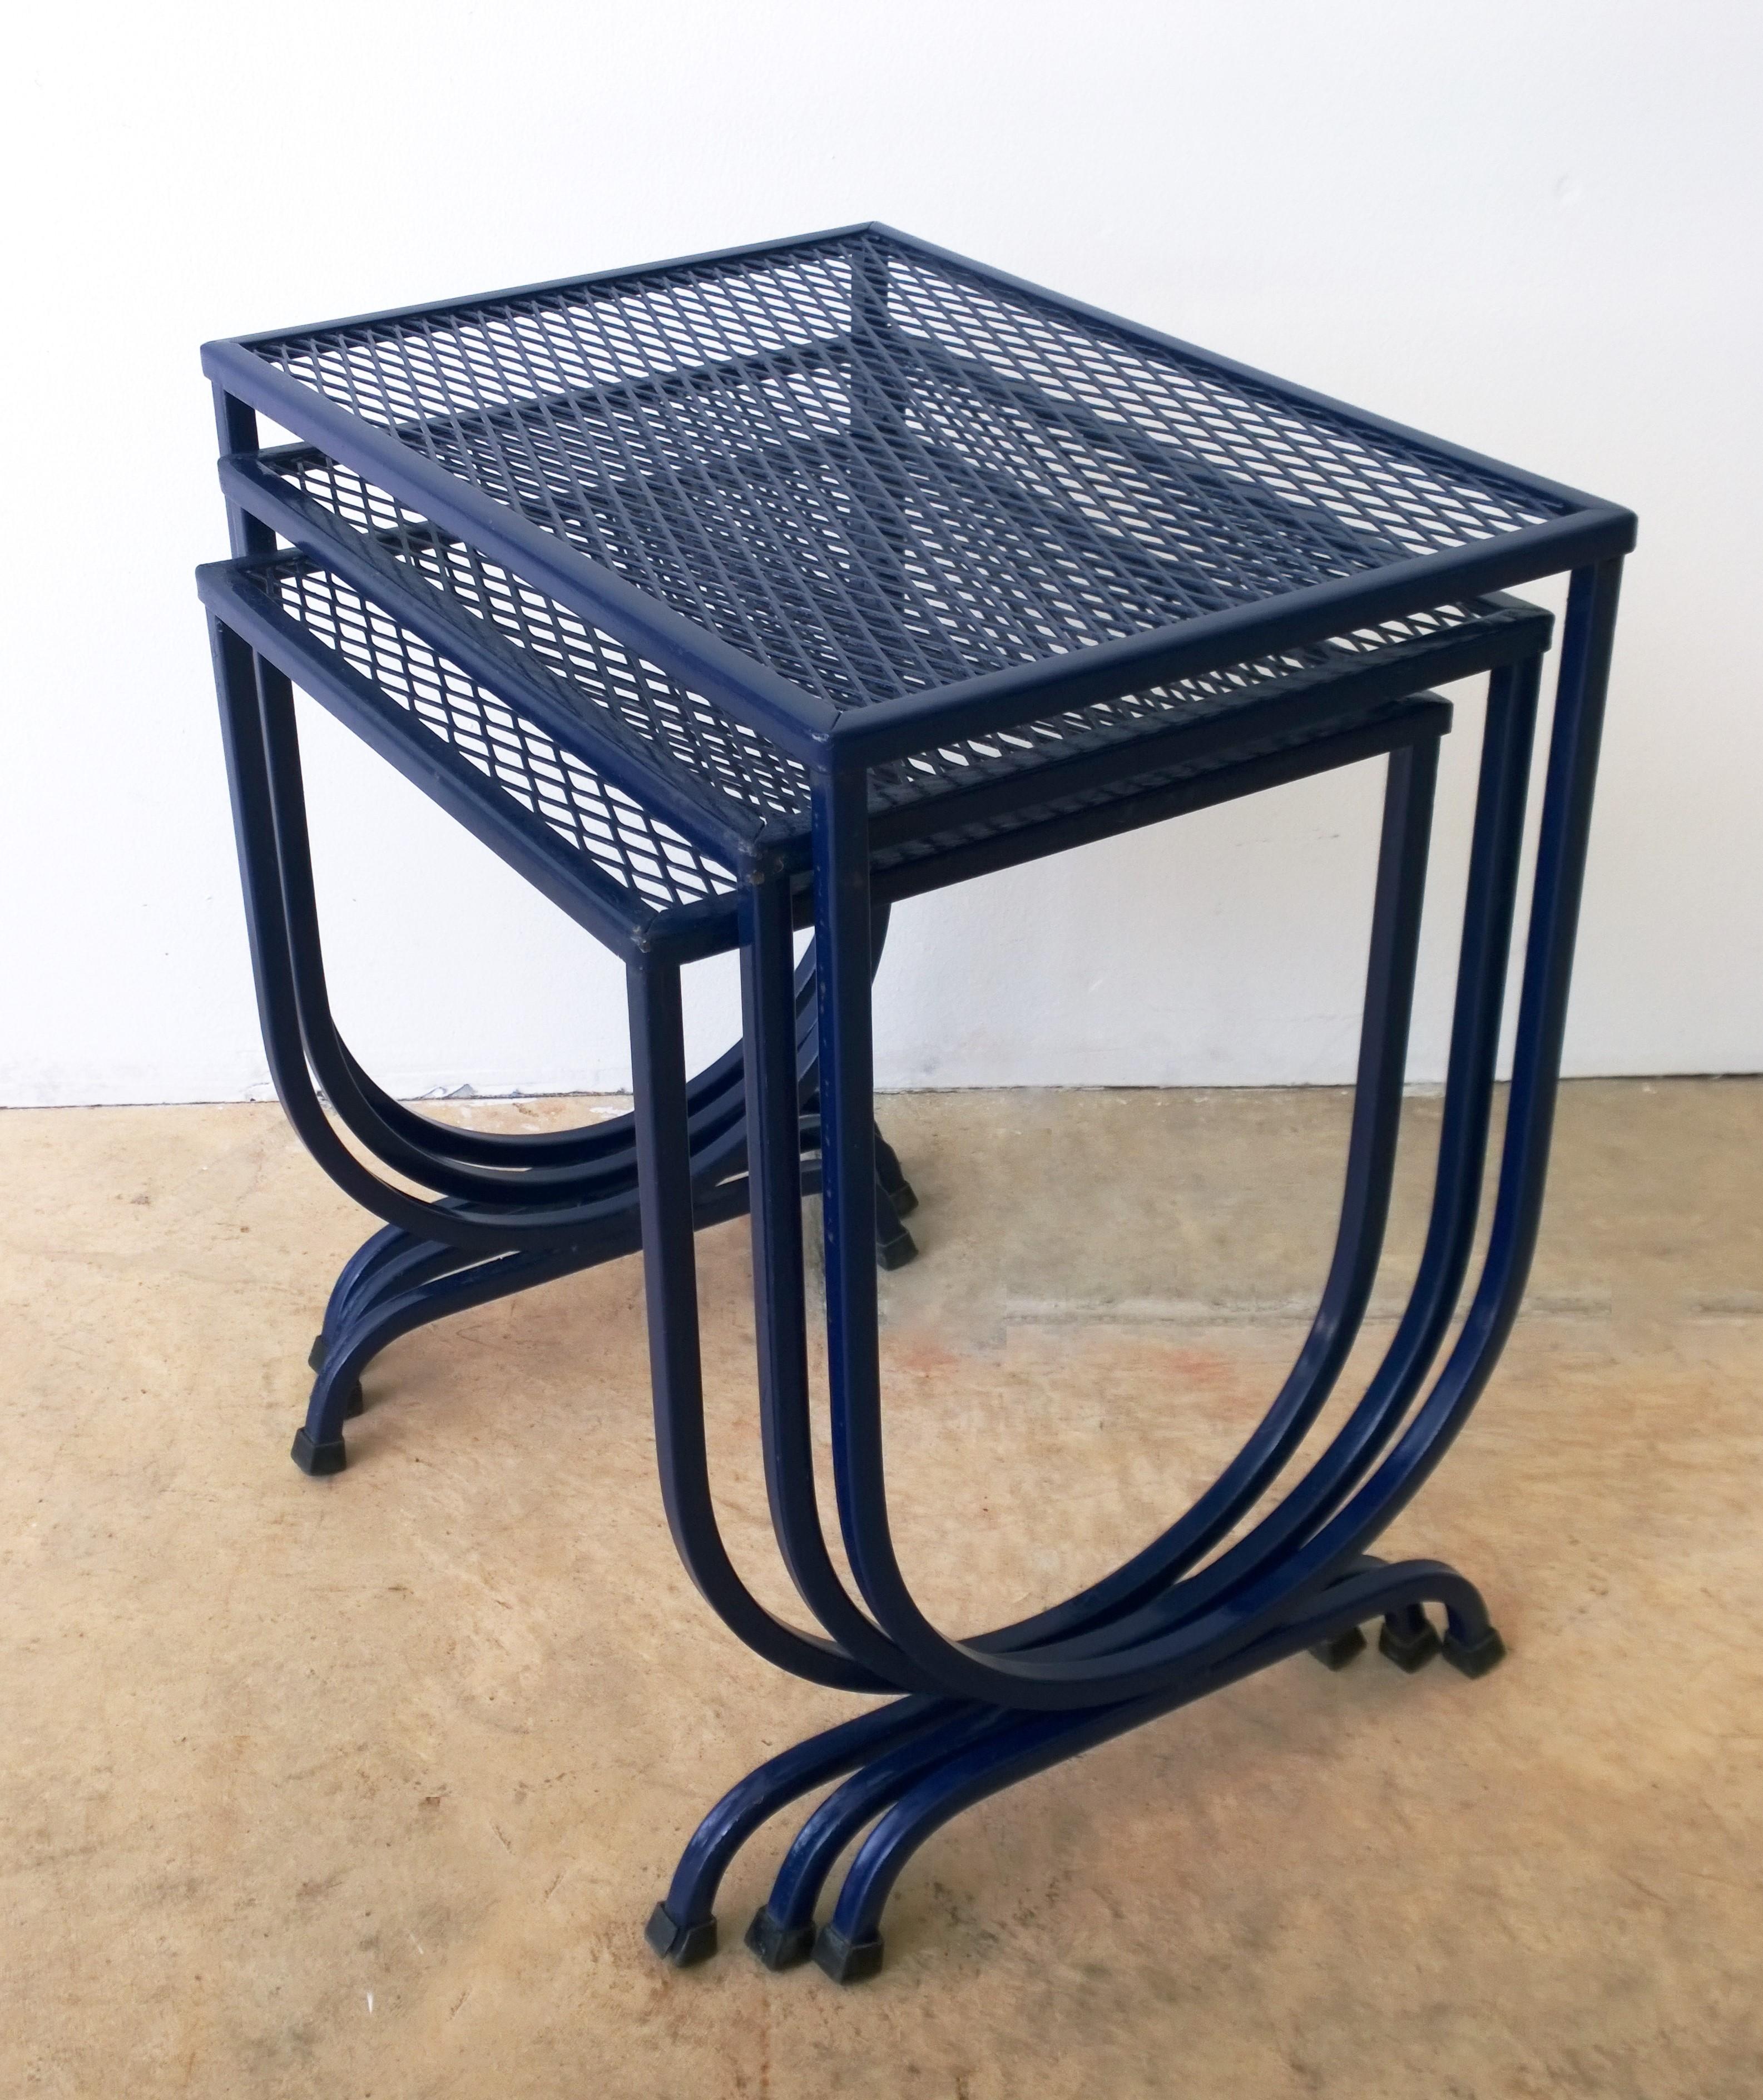 Offered is Mid-Century Modern set of three John Salterini outdoor wrought iron patio / garden stacking / nesting tables newly enameled in navy blue. The stacking tables are easy to move around; however, they are quite sturdy. Wonderful for outdoor